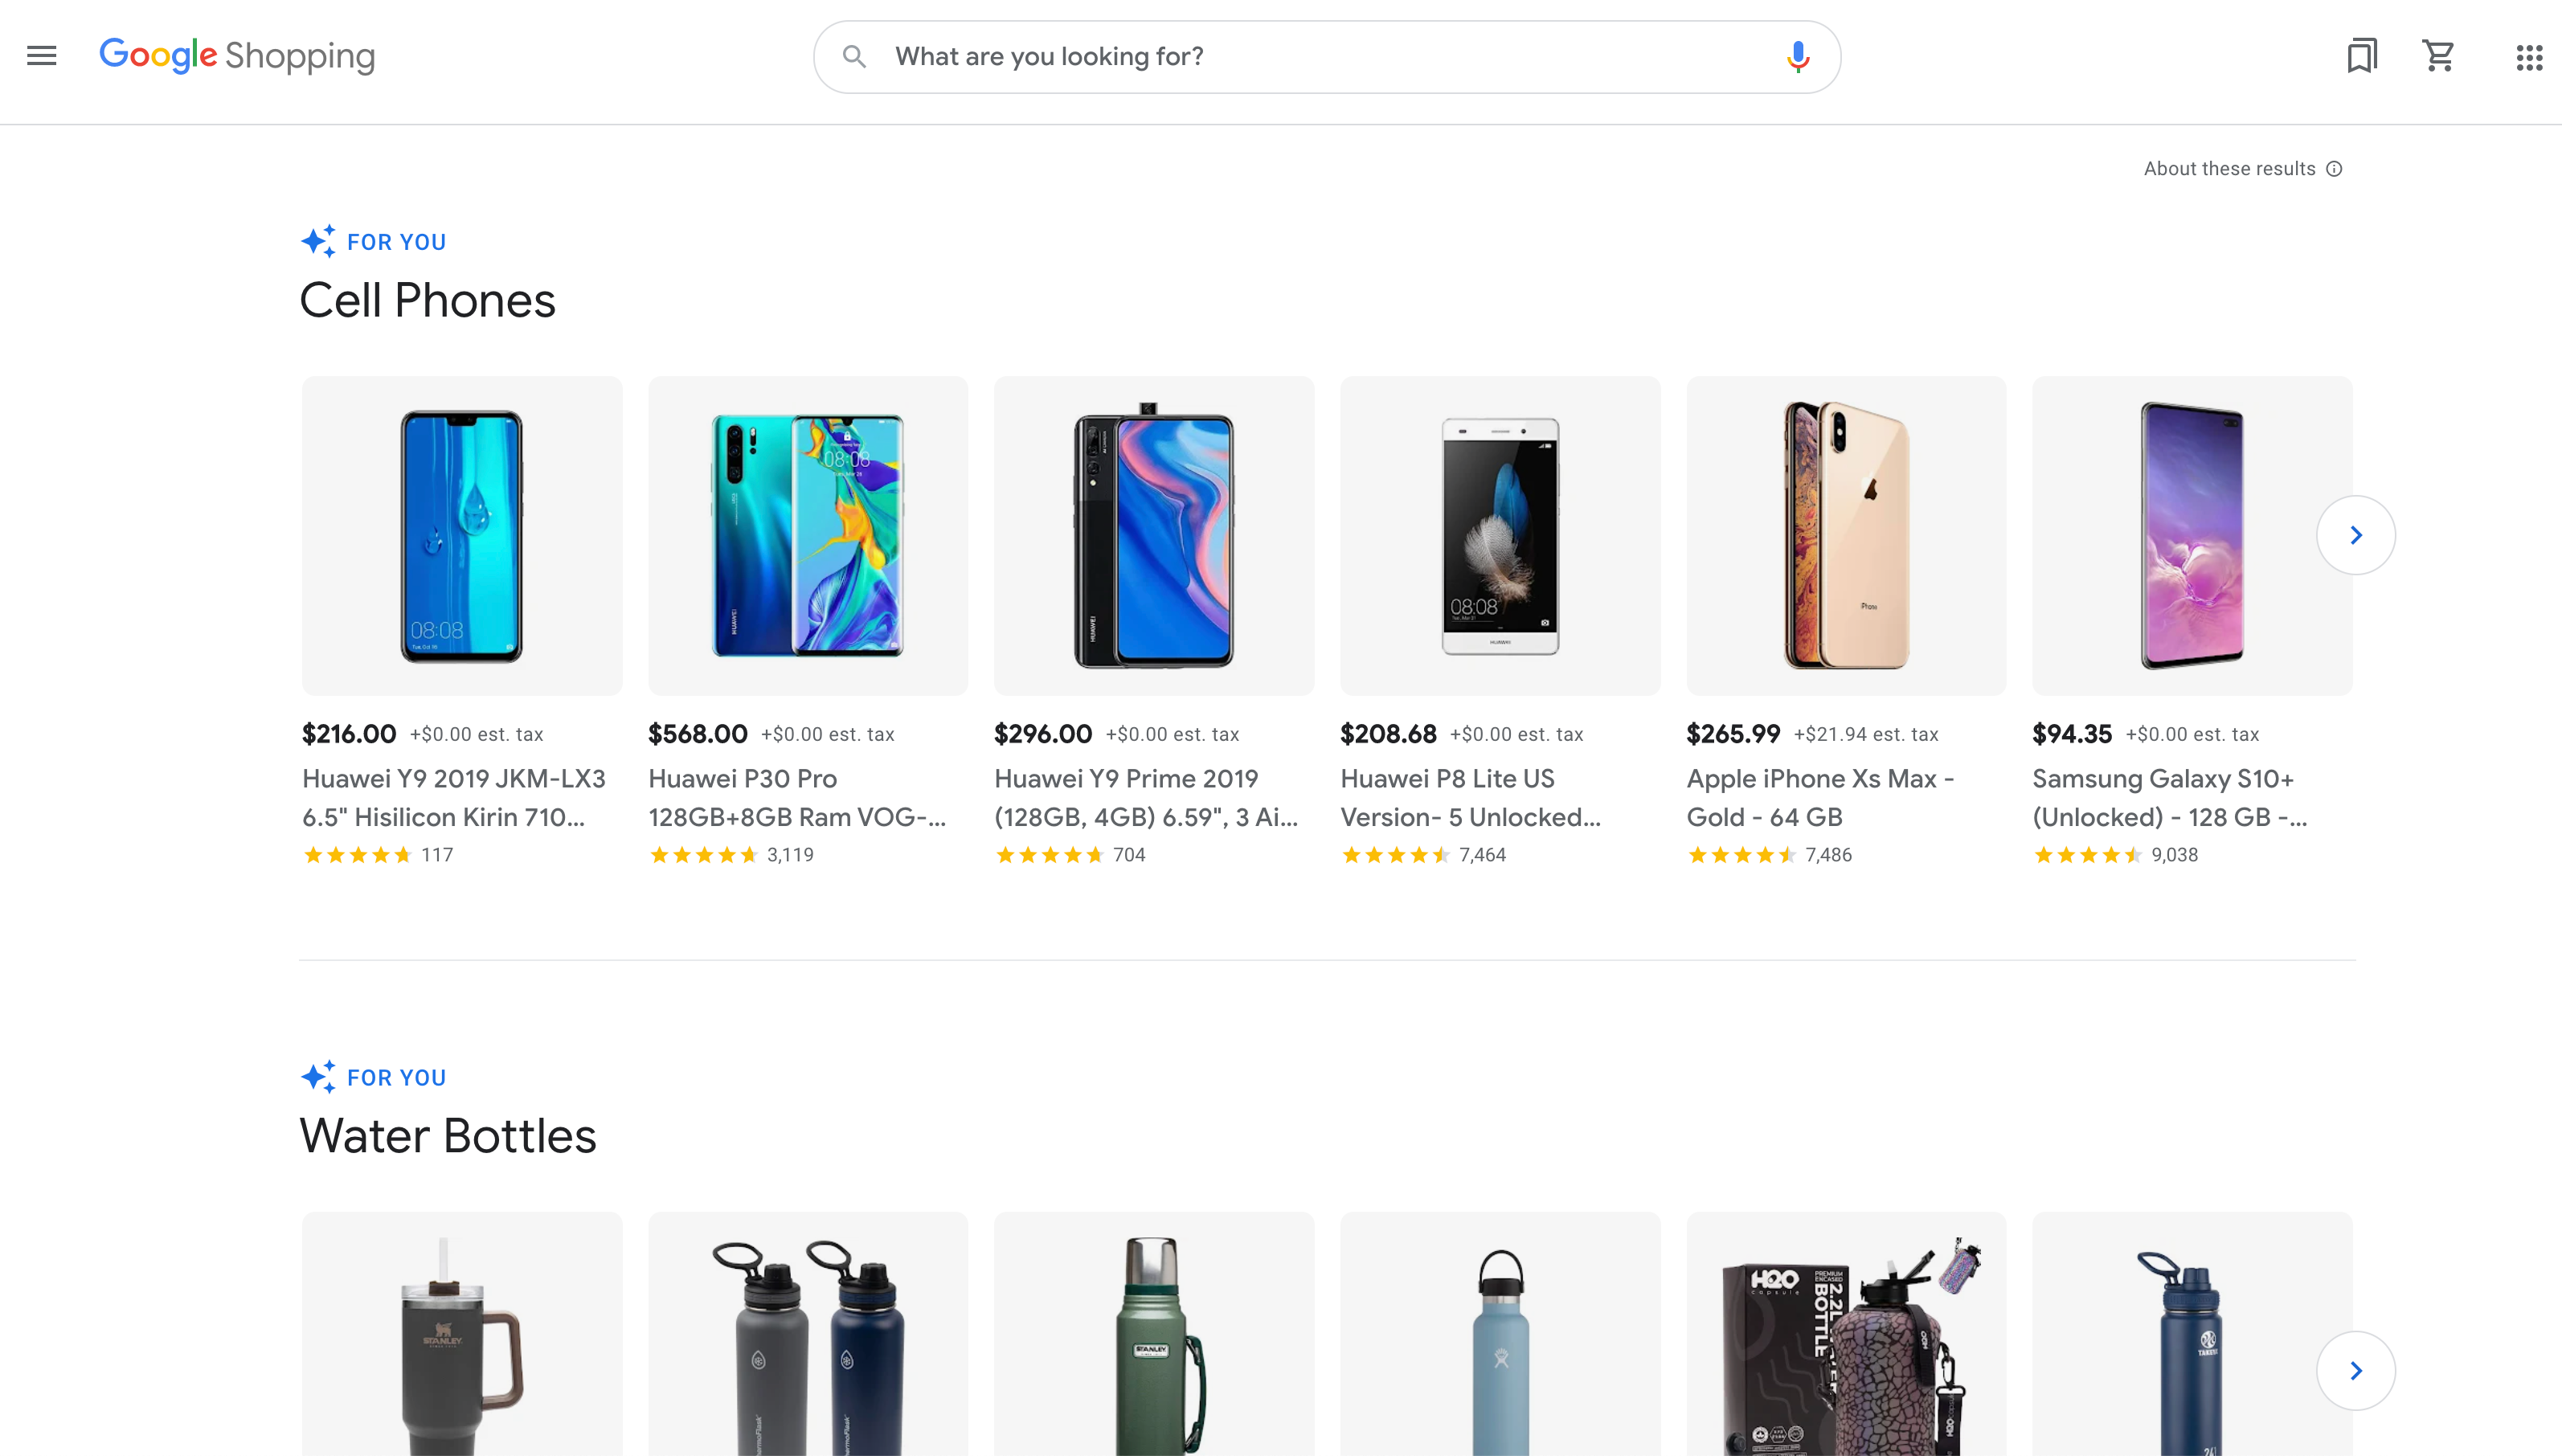 Google Shopping search result for "Cell phones" 